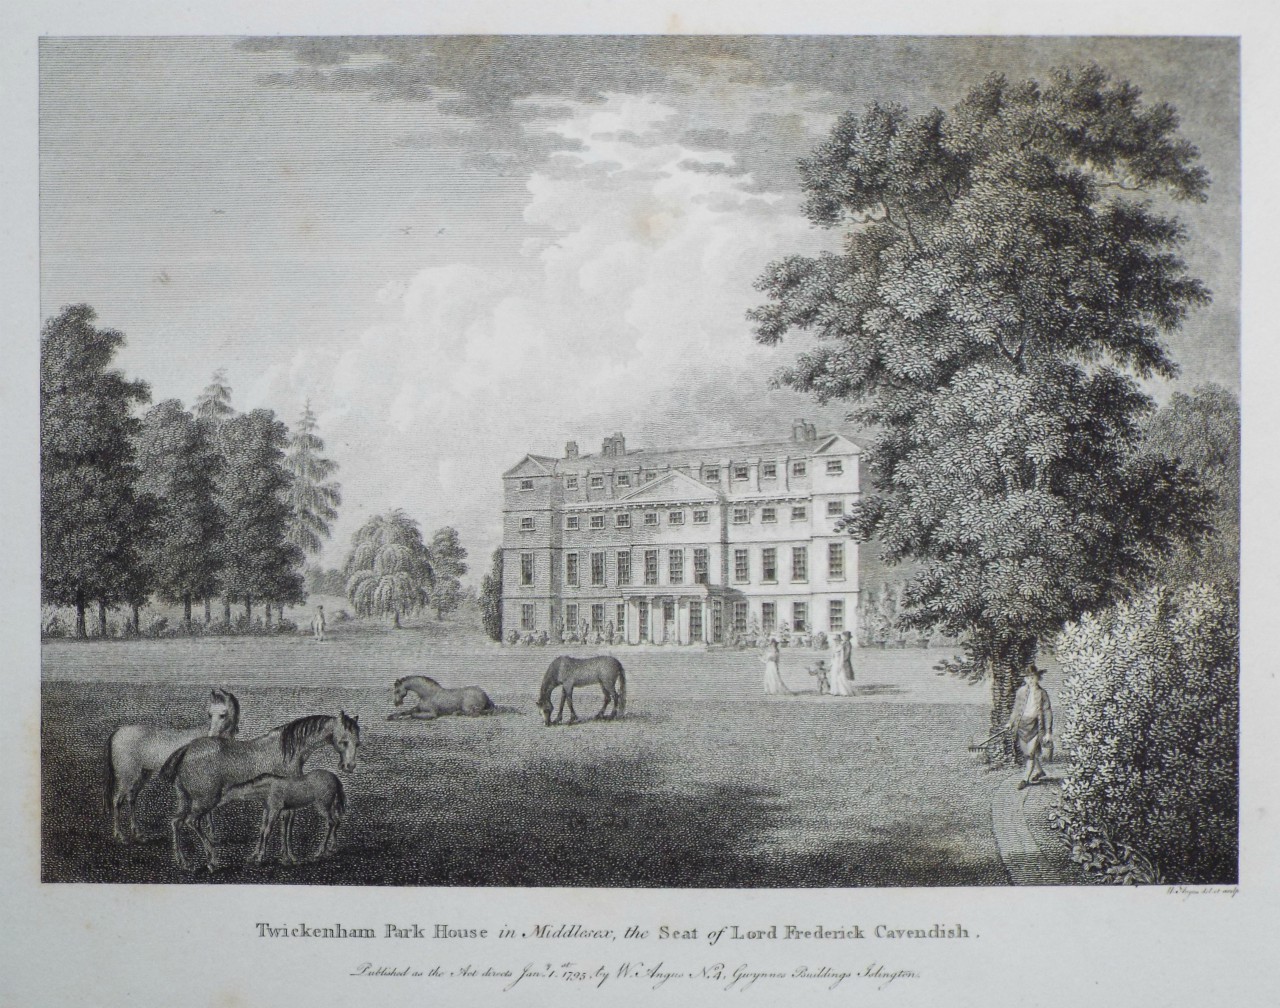 Print - Twickenham Park House in Middlesex, the Seat of Lord Frederick Cavendish. - Angus